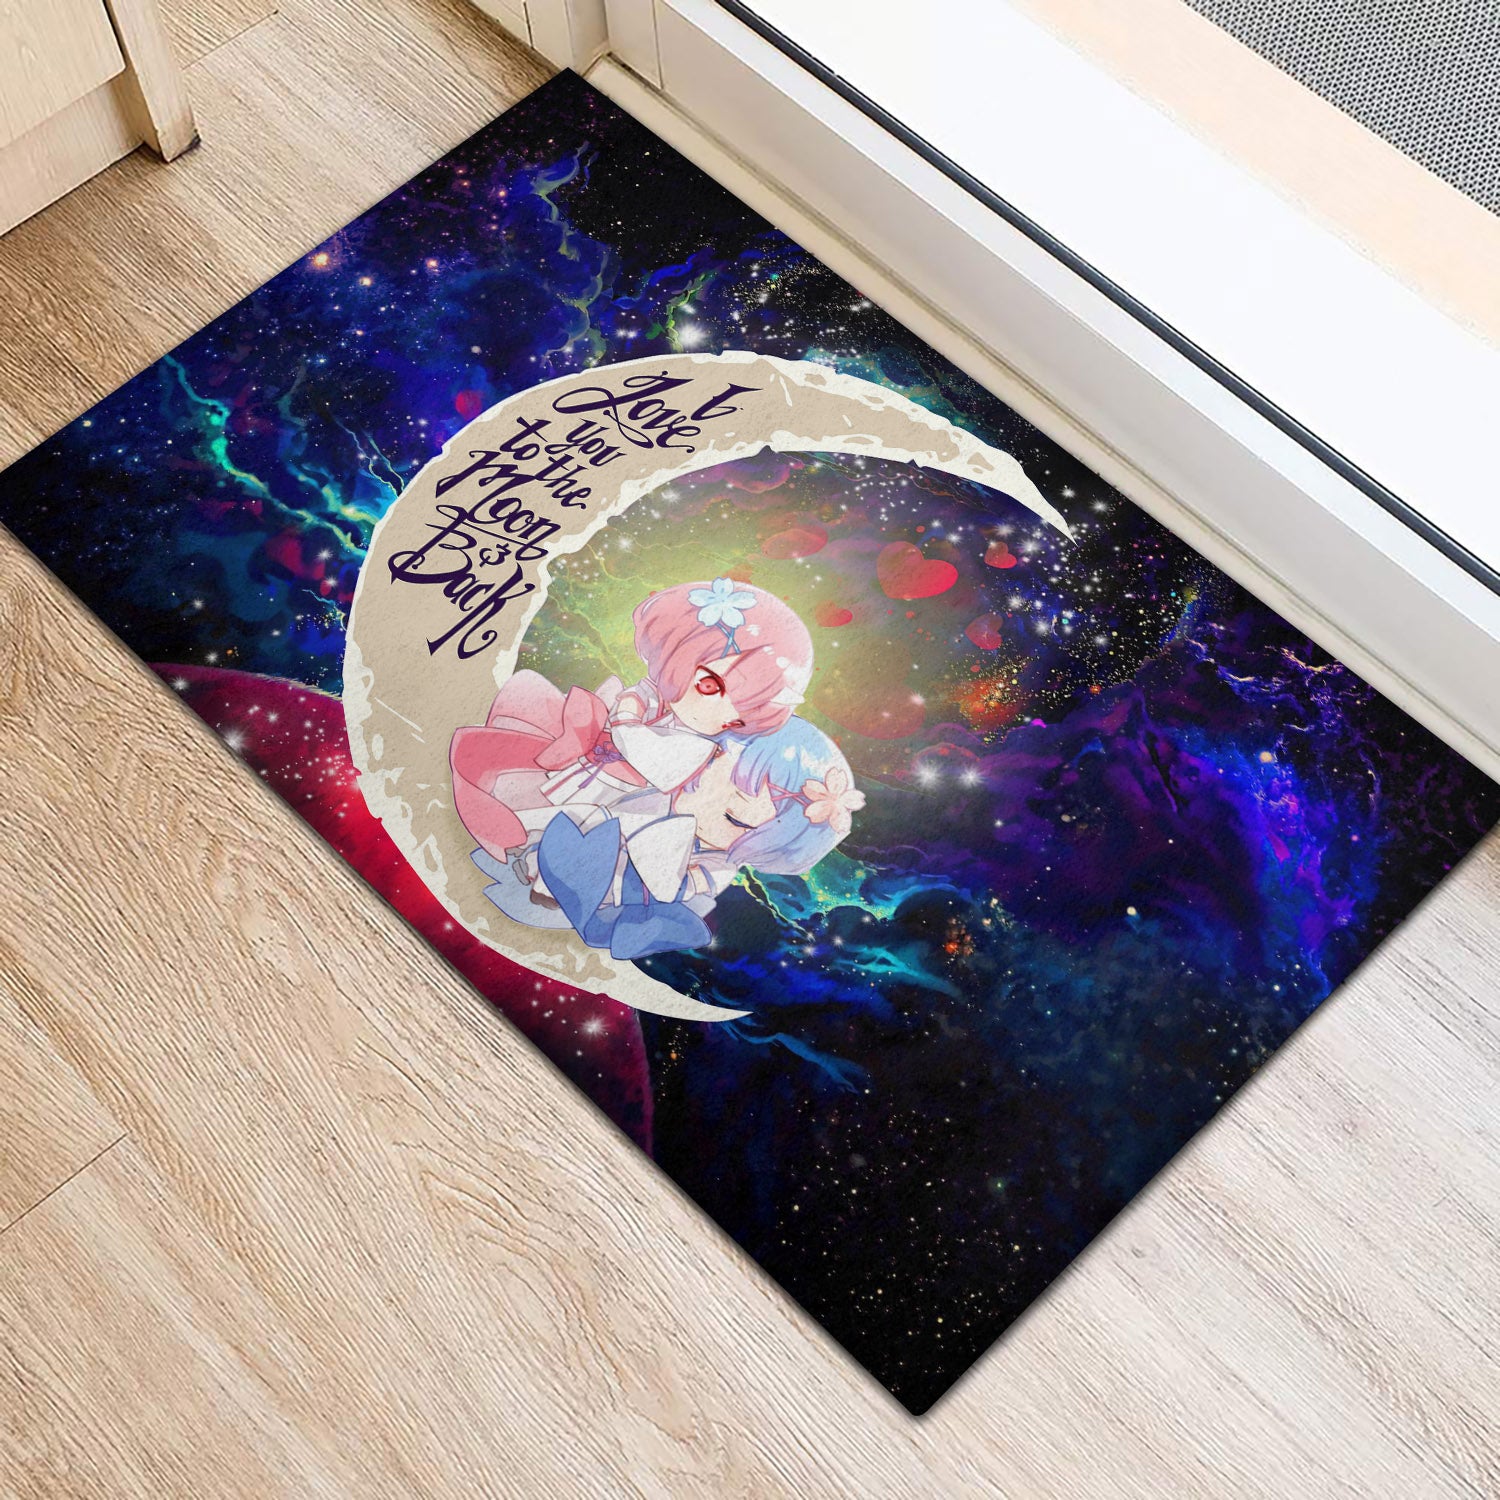 Ram And Rem Re Zero Love You To The Moon Galaxy Back Door Mats Home Decor